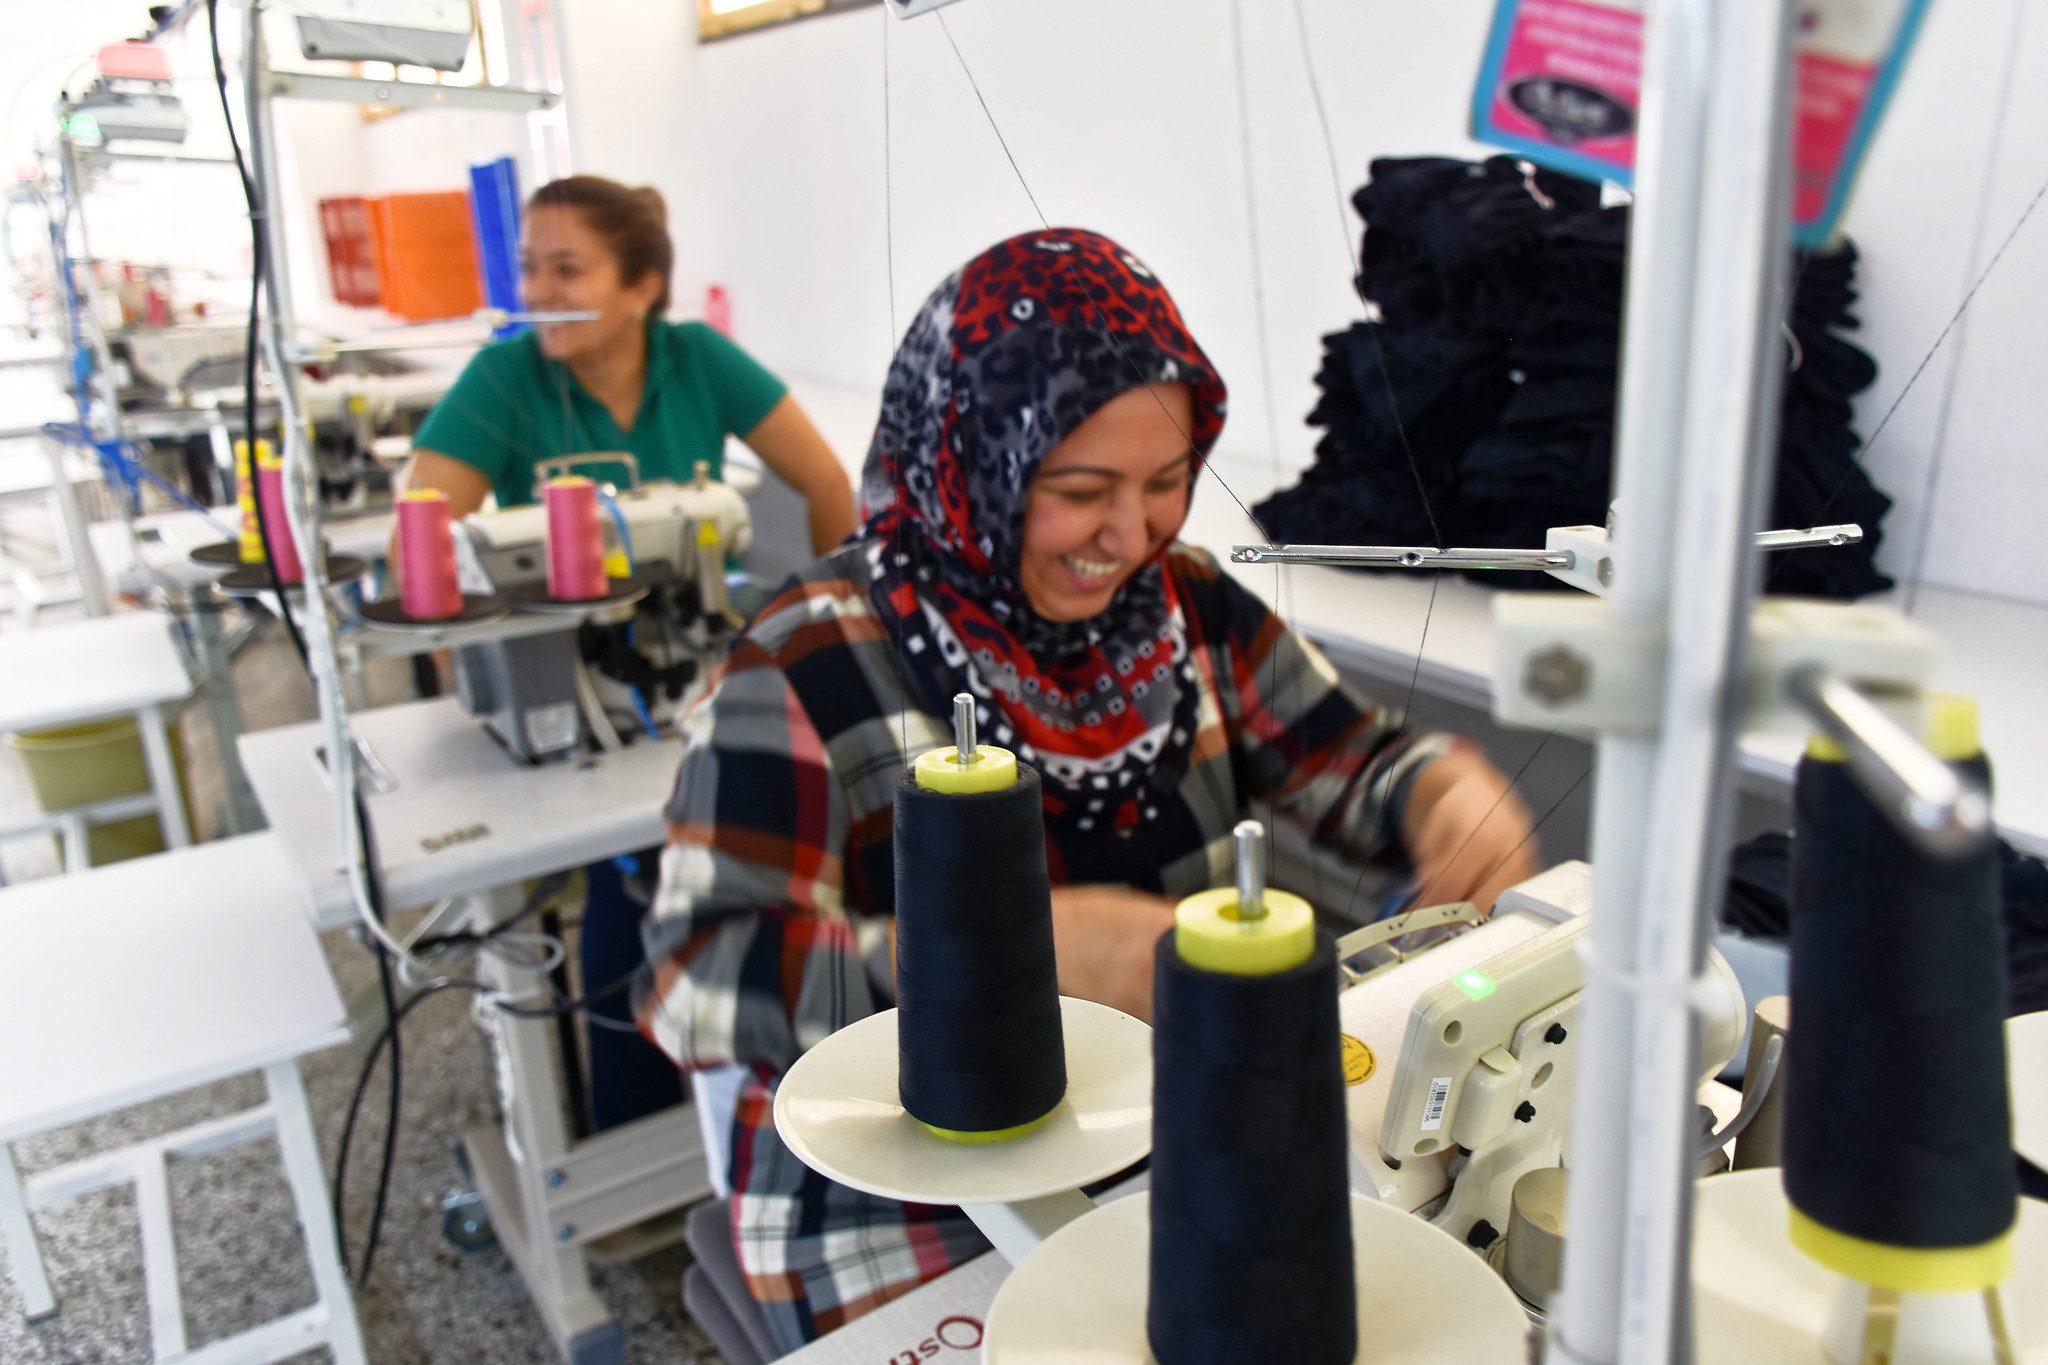 Women working at a textiles factory in Izmir; Turkish manufacturing has been hit by rising costs and interest rates but economic growth is still anticipated